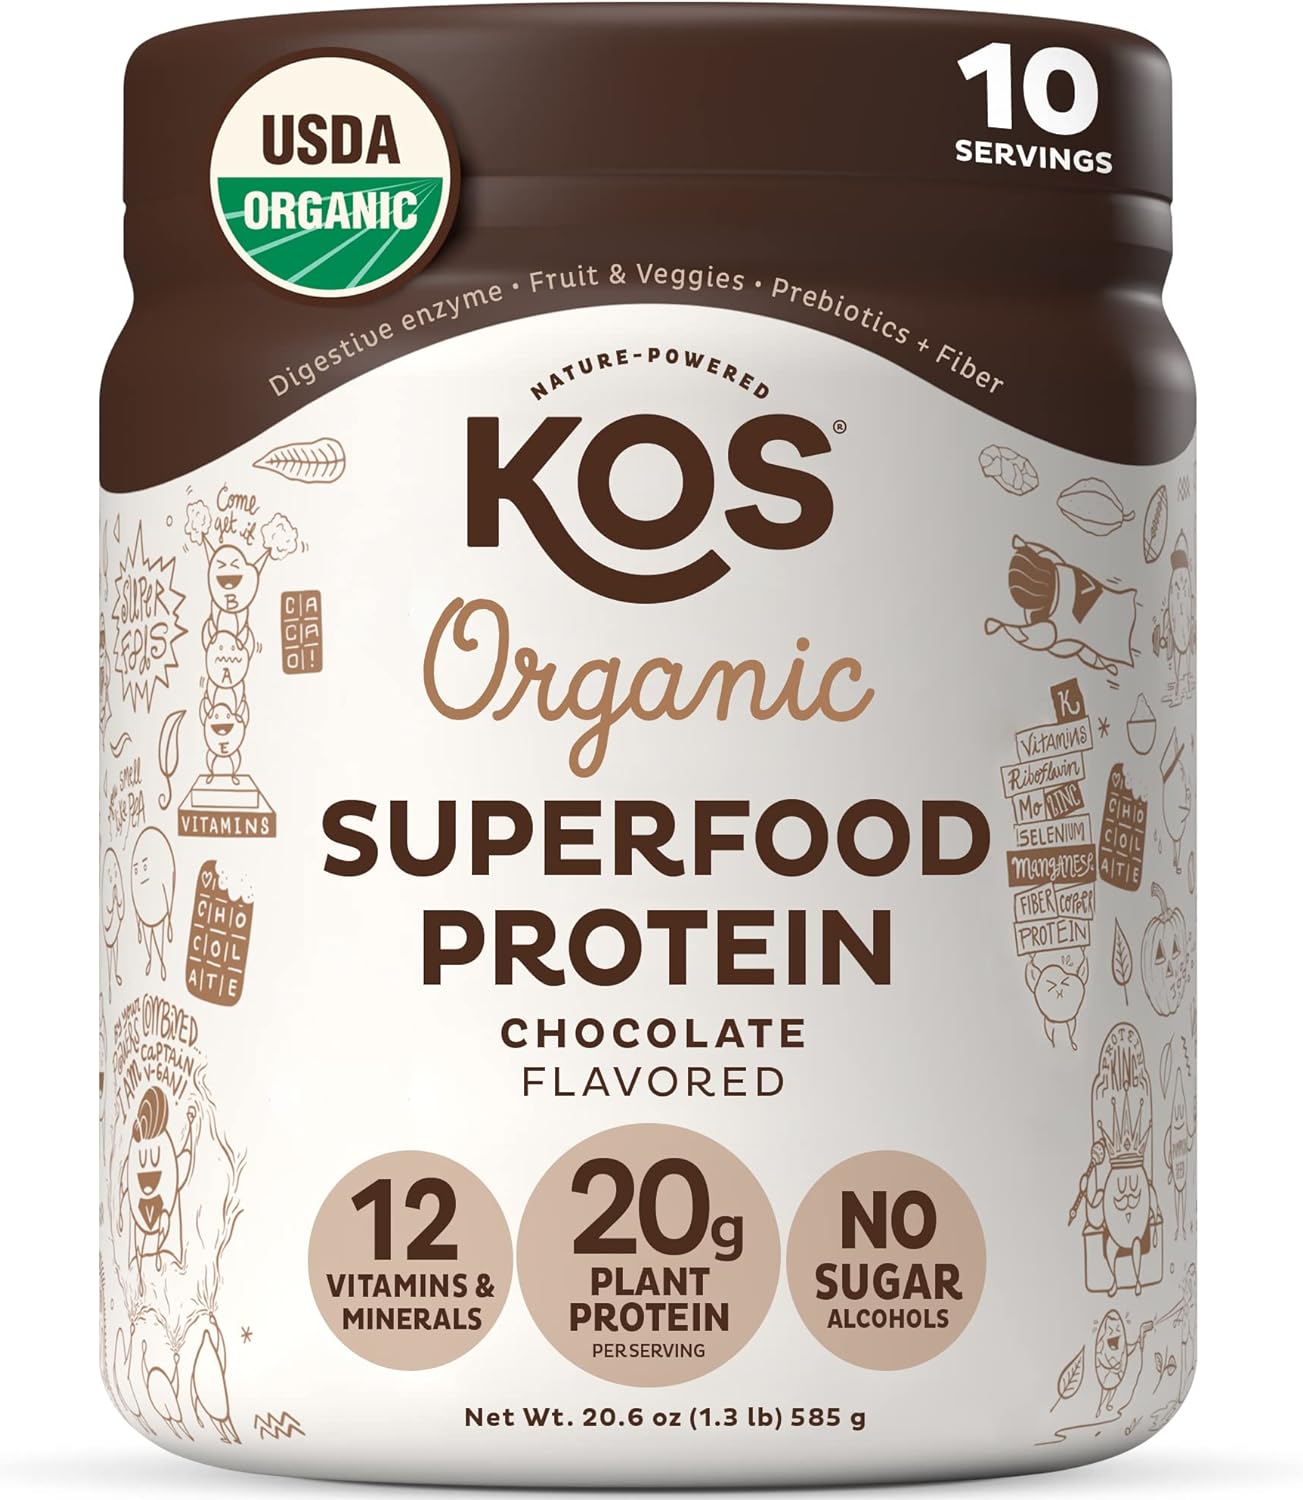 KOS Vegan Protein Powder, Chocolate USDA Organic - Low Carb Pea Protein Blend, Plant Based Superfood with Vitamins & Minerals - Keto, Soy, Gluten Free - Meal Replacement for Women & Men - 10 Servings